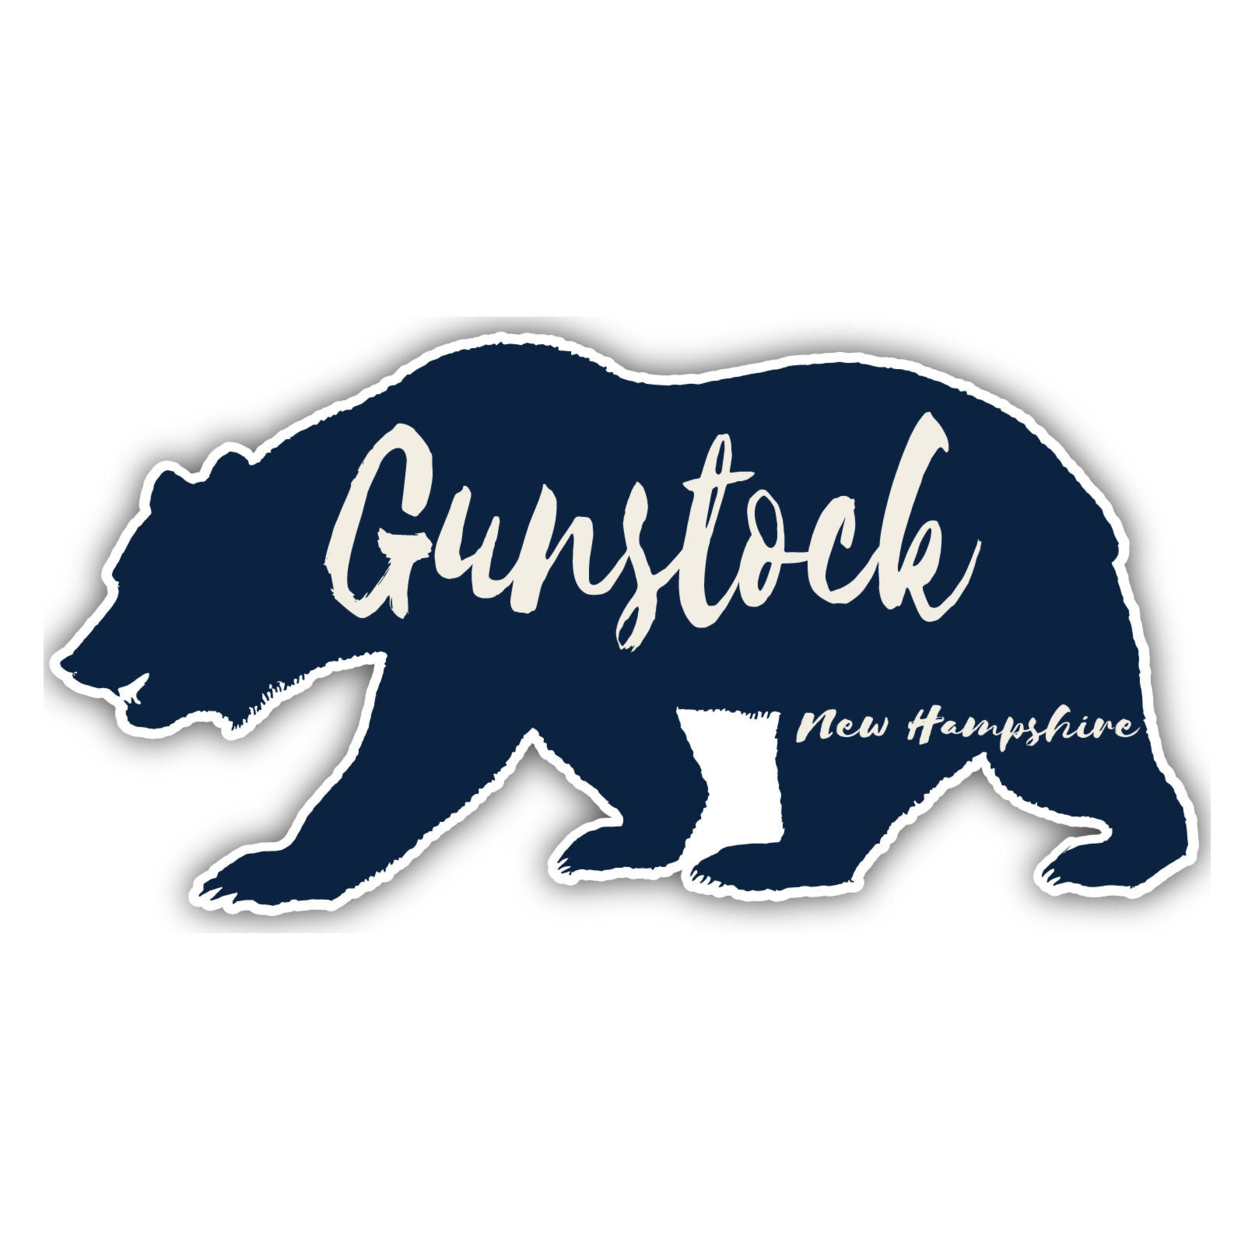 Gunstock New Hampshire Souvenir Decorative Stickers (Choose Theme And Size) - 4-Pack, 2-Inch, Bear